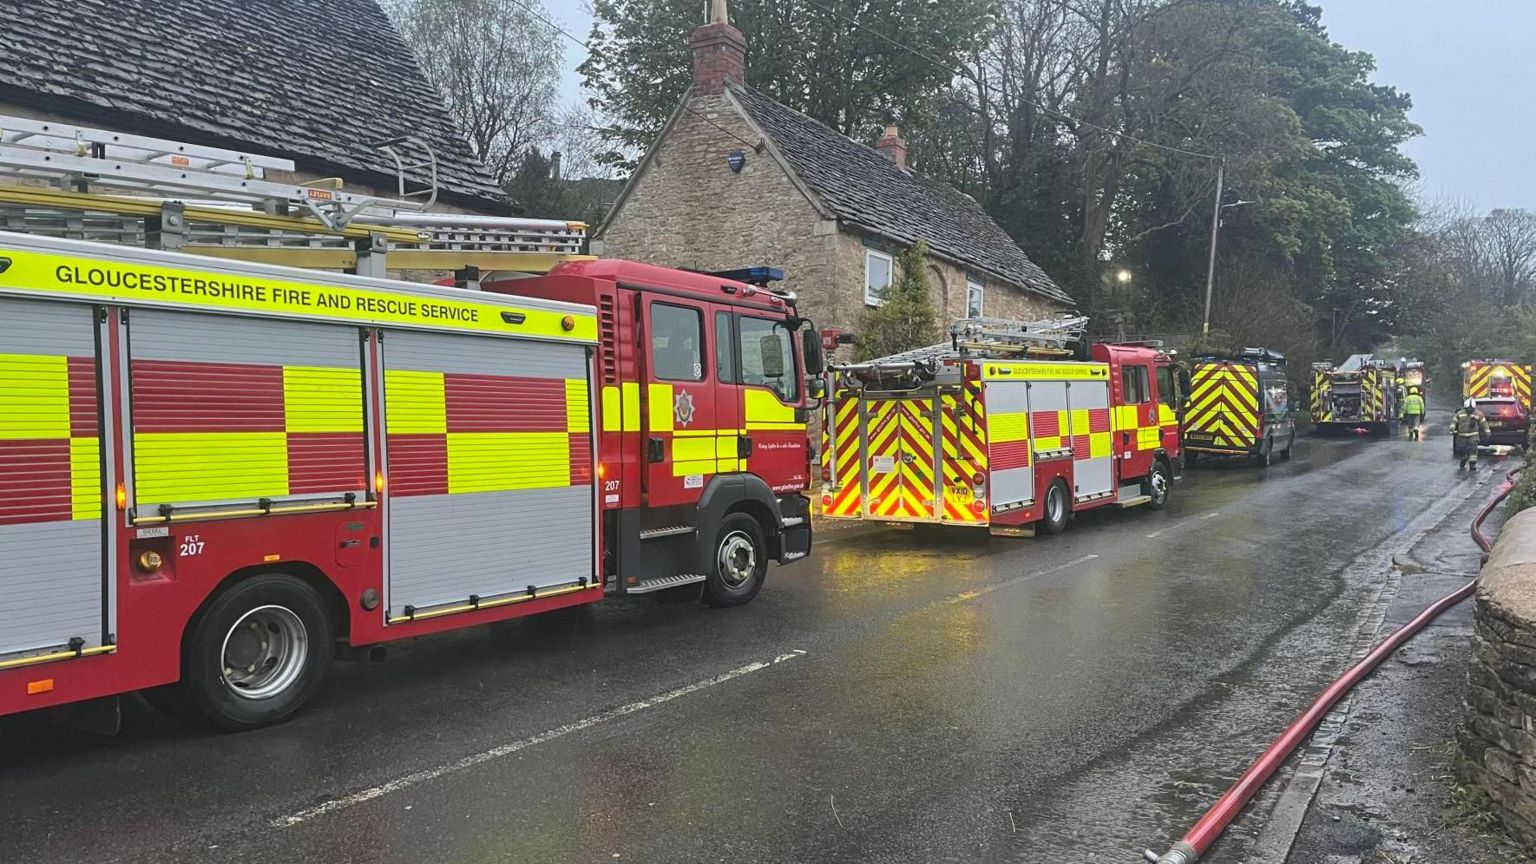 Fire engines on a road